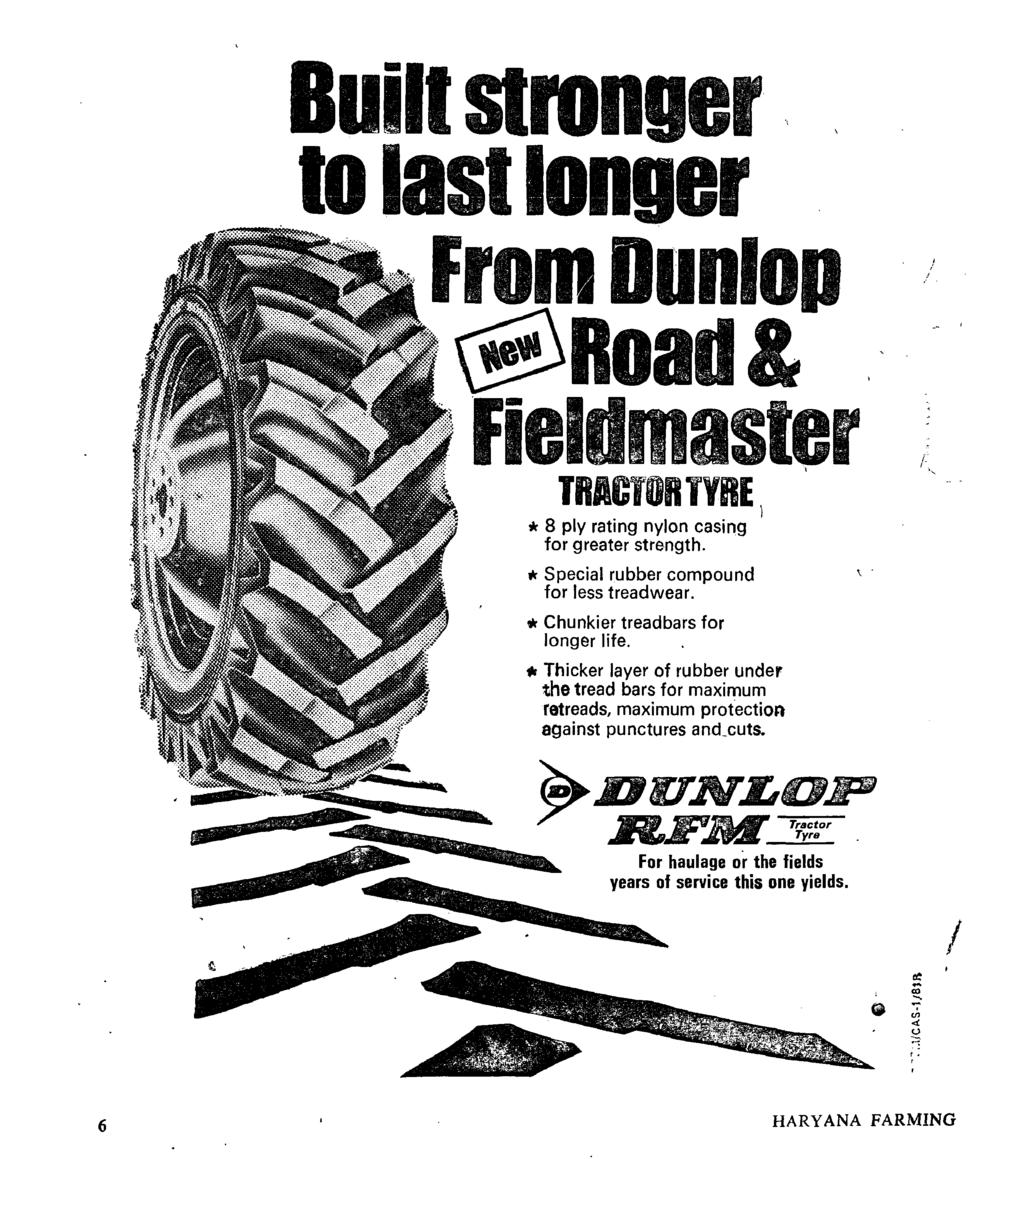 a Built stronger.. to last longer From Donlop. @Road& Fiel master TRACTOR lyre) * 8 ply rating nylon casing for greater strength. * Special rubber compound for less treadwear.